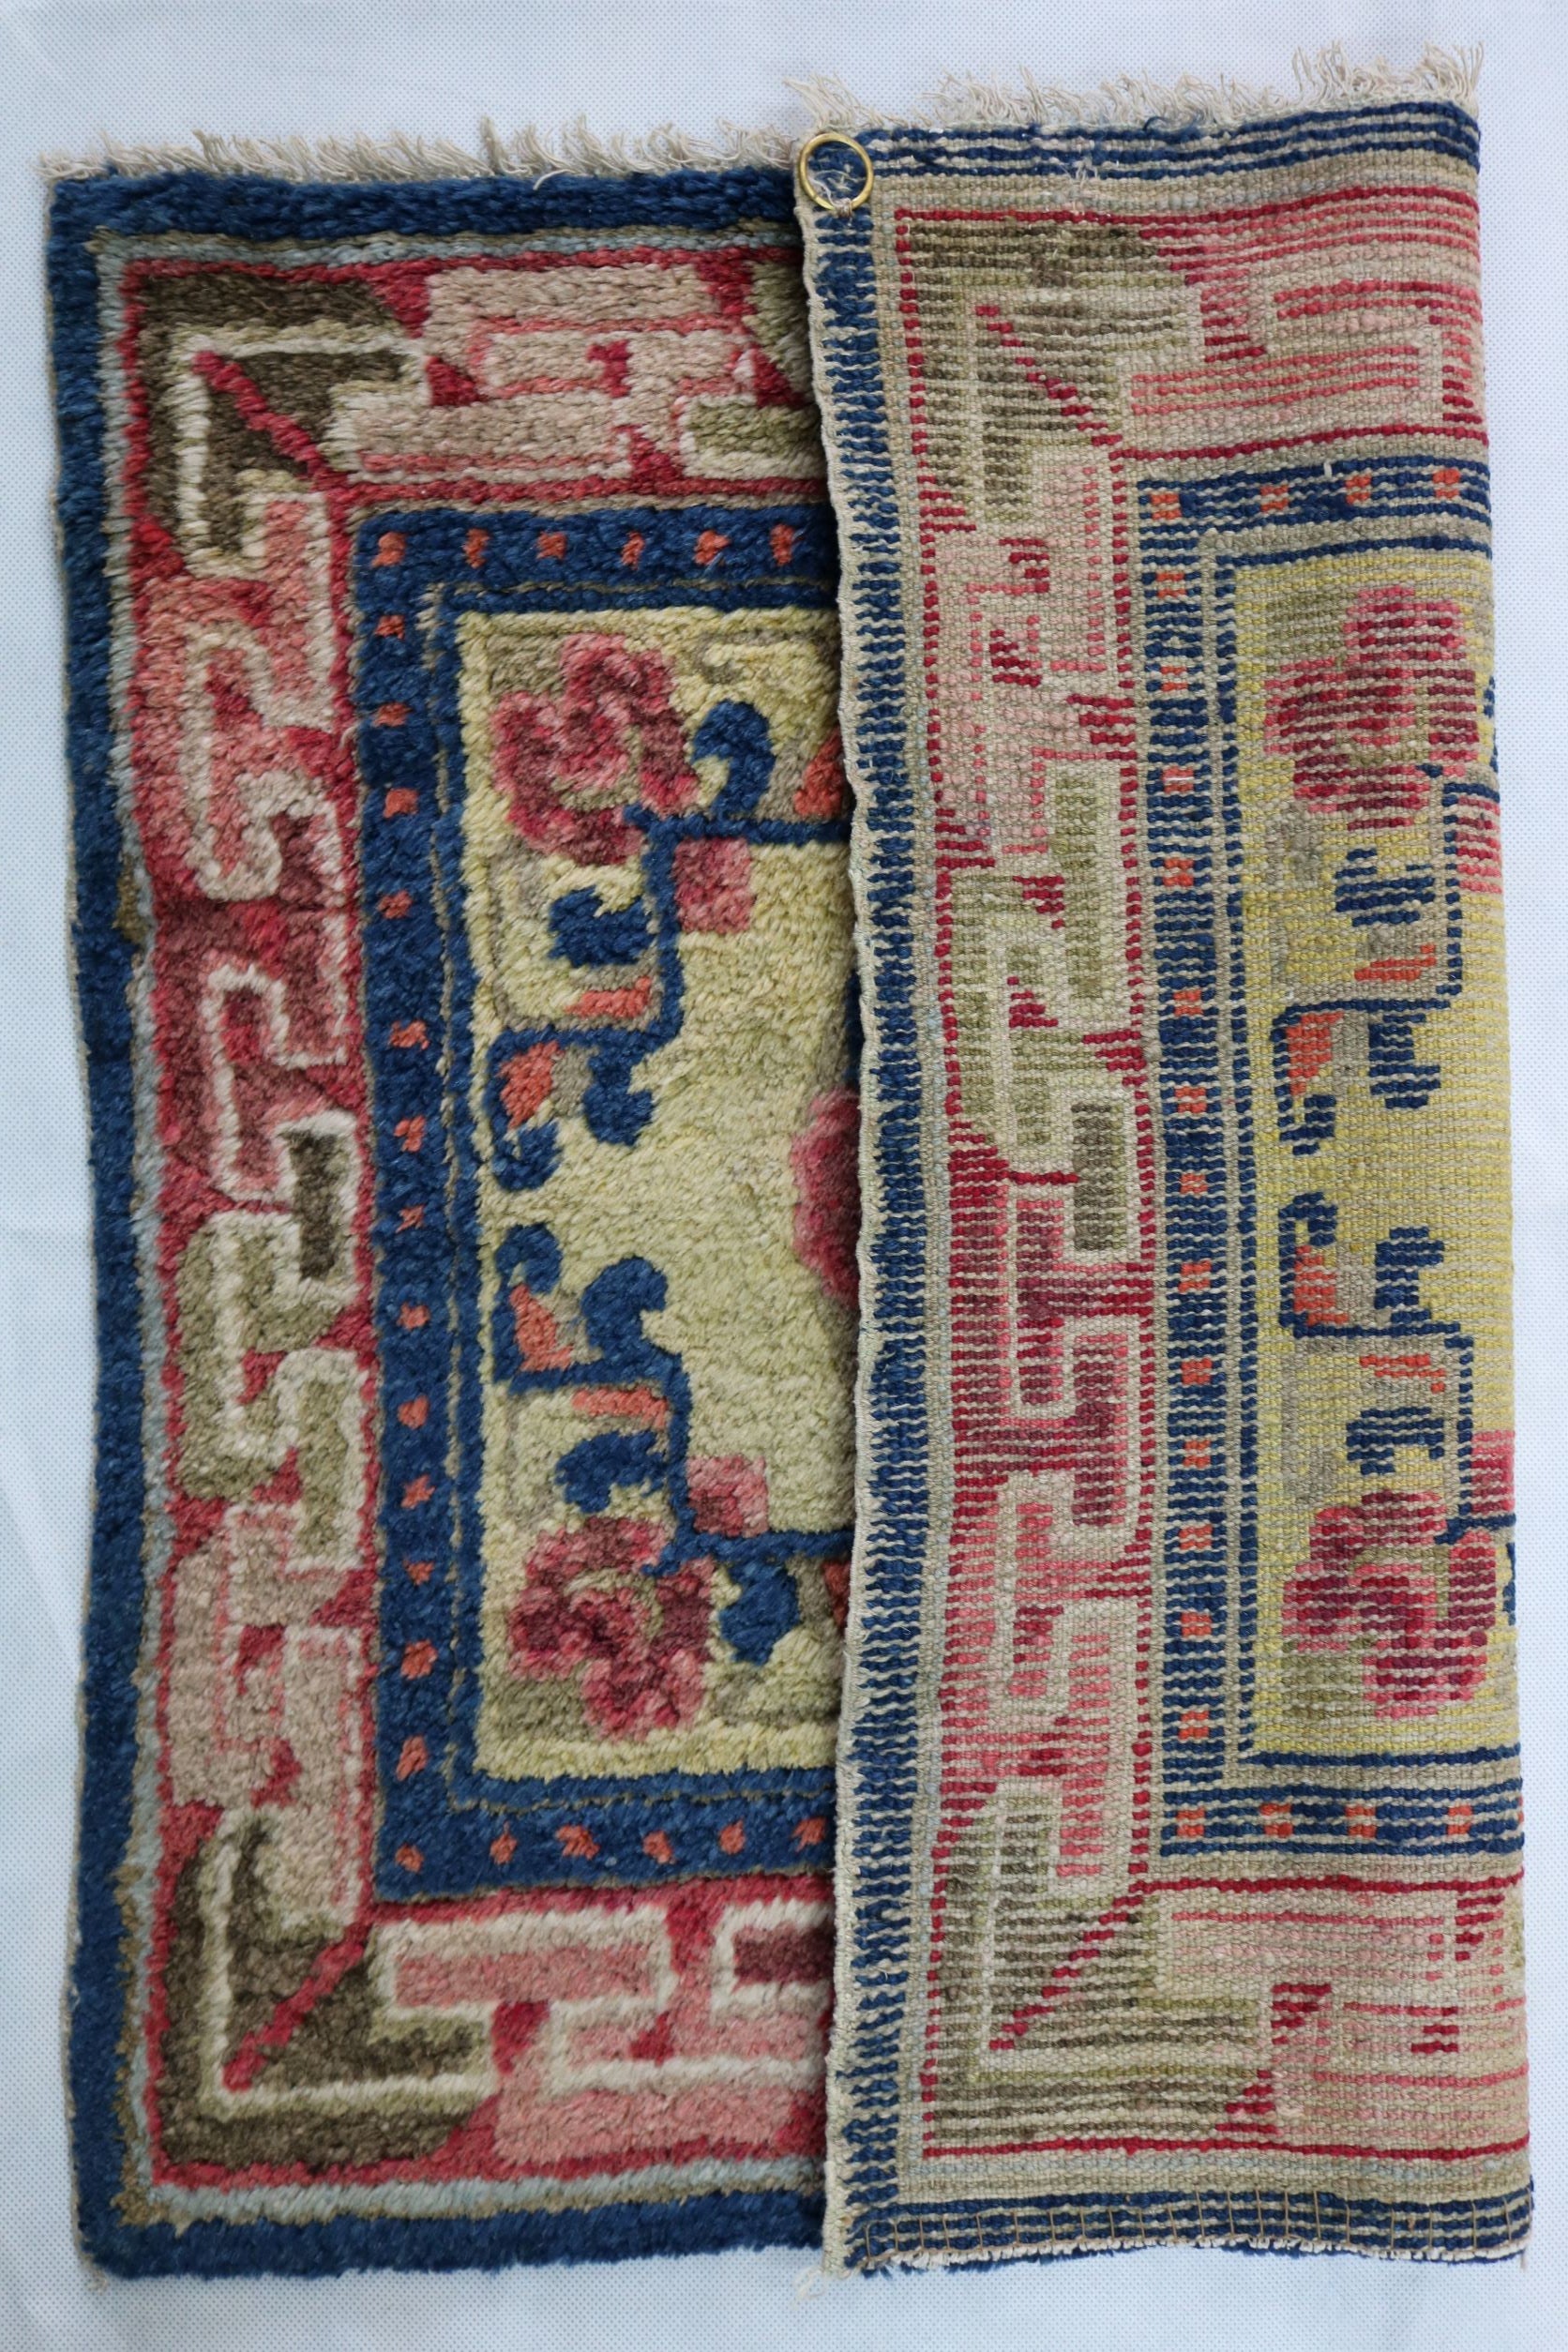 Antique chinese mat - Hakiemie Rug Gallery